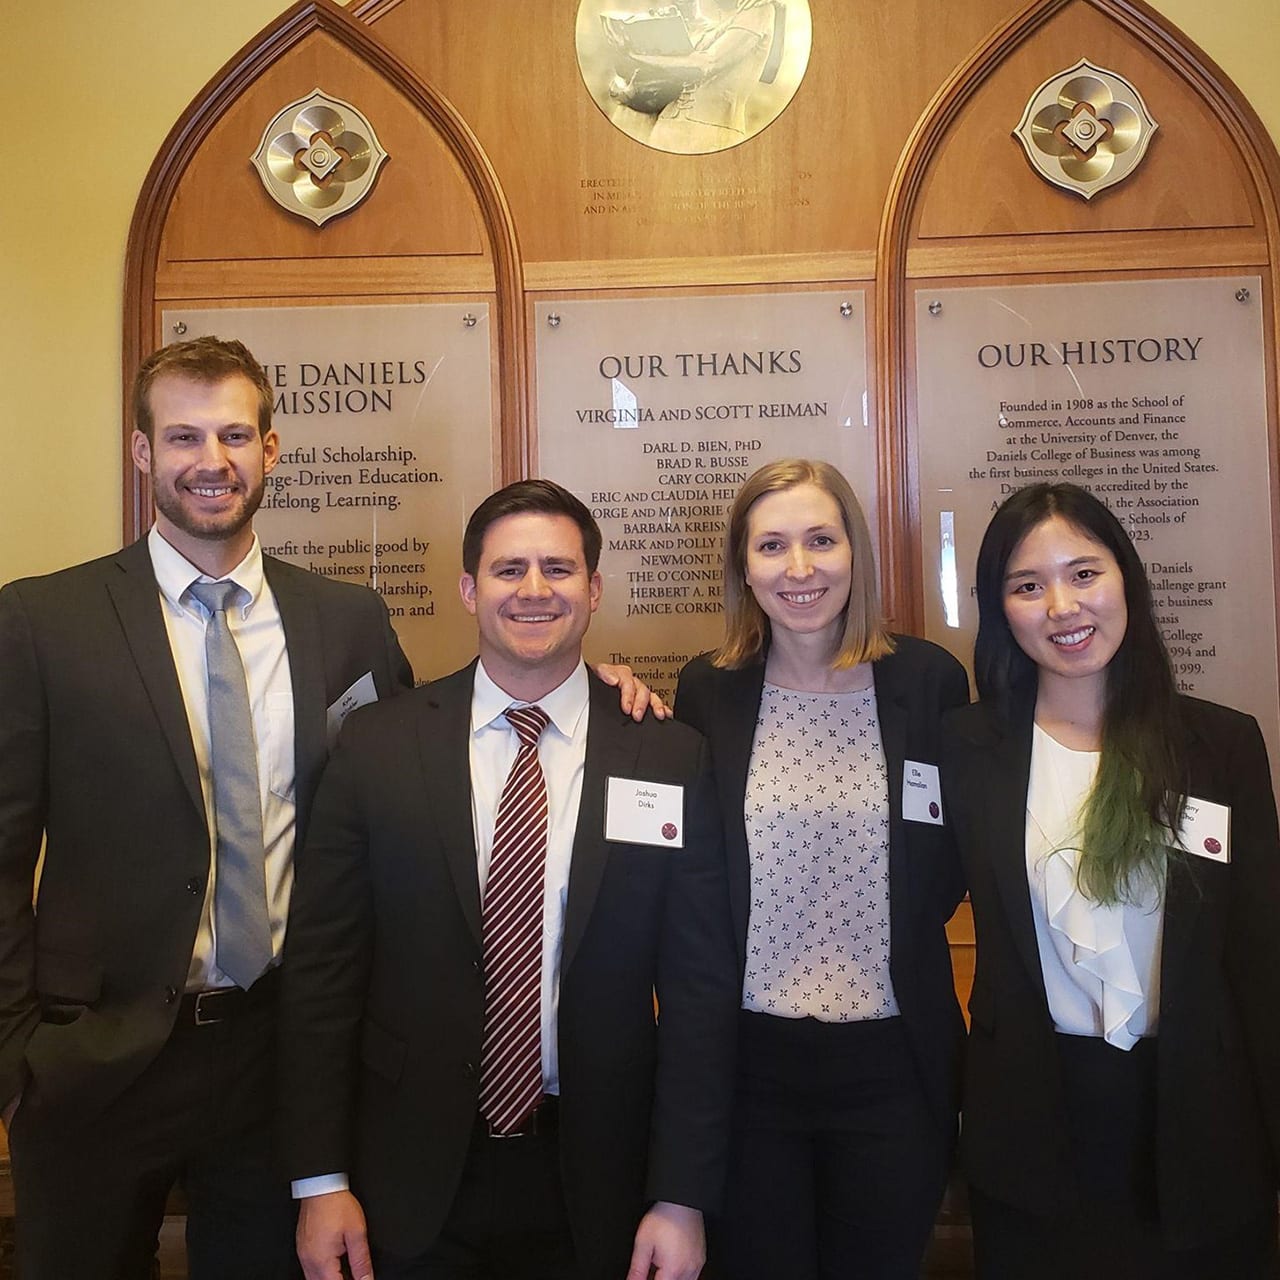 Kyle Winkler, Josh Dirks, Ellie Hamalian, and Tiffany Cho, following their business case presentation at the University of Denver Daniels College of Business